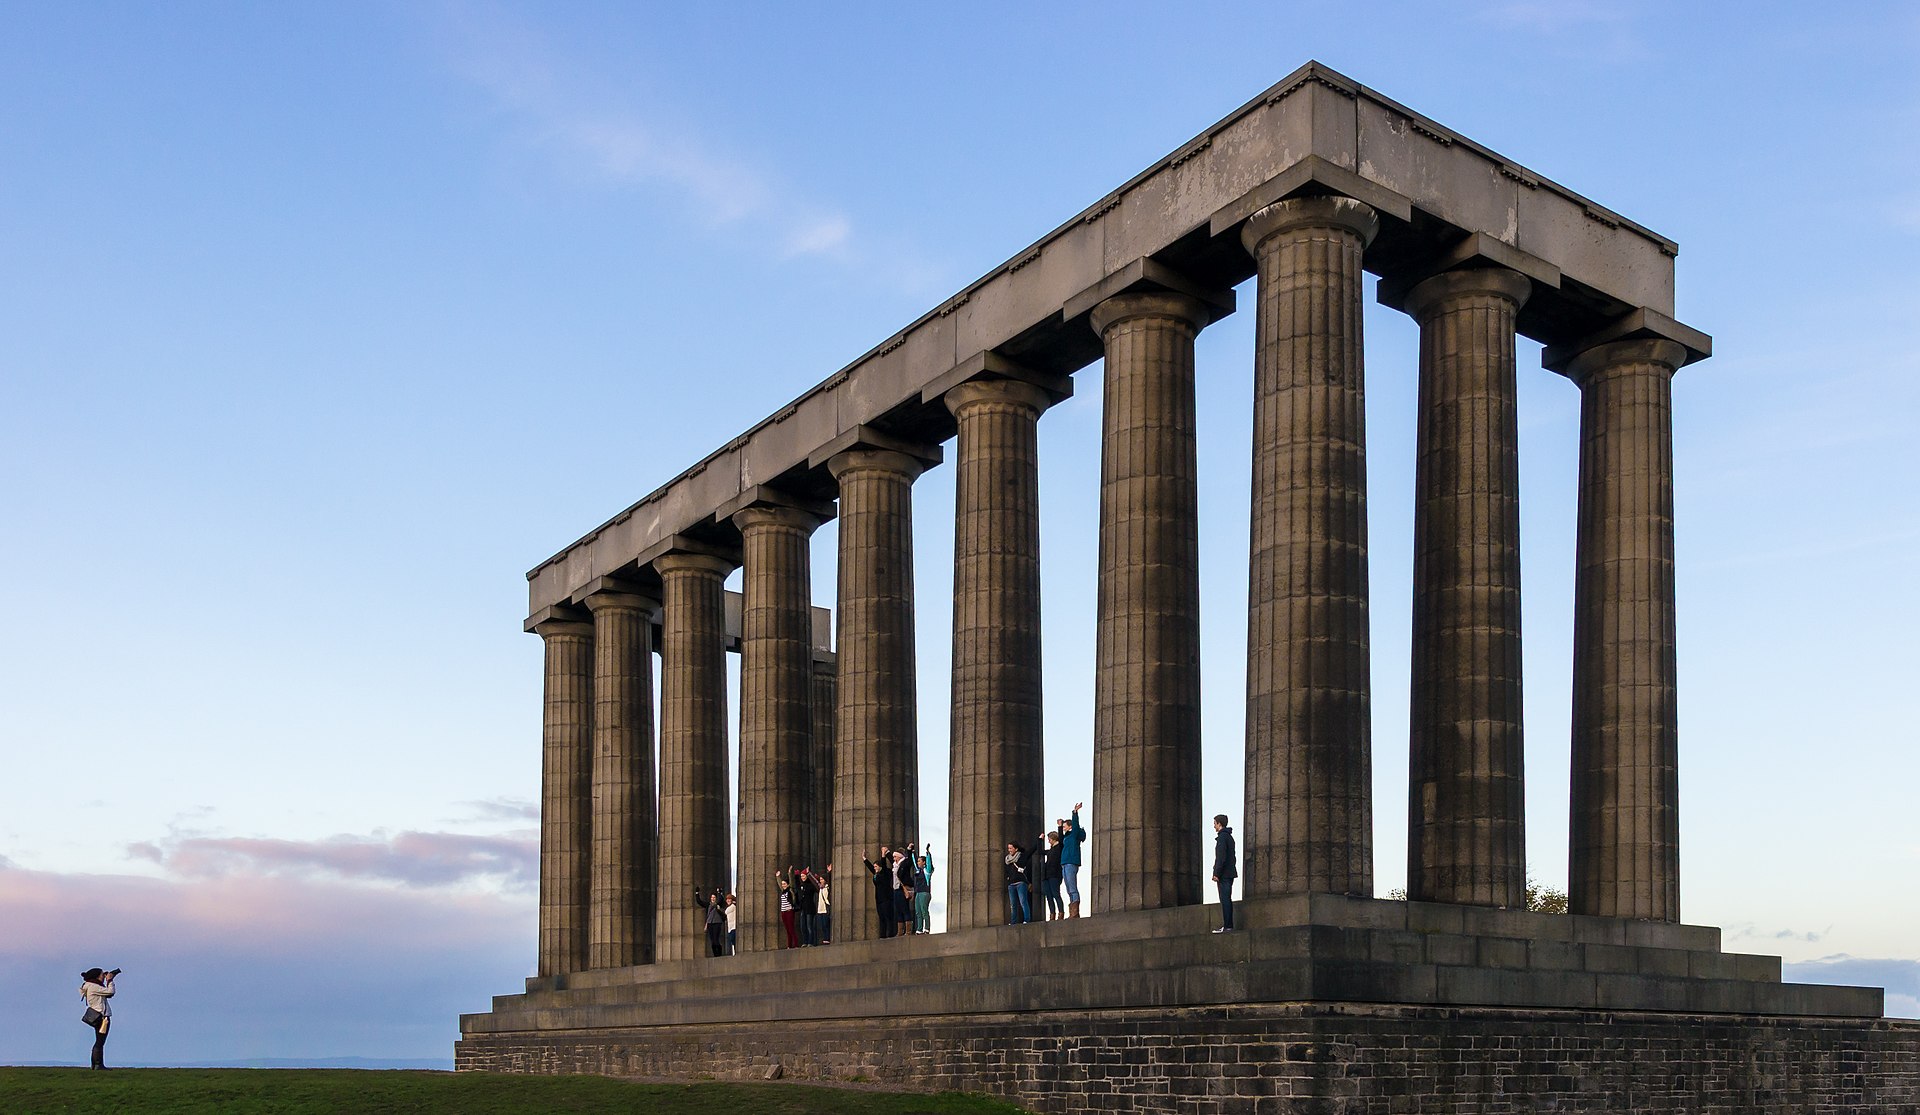 National monument of Scotland - The National Monument of Scotland